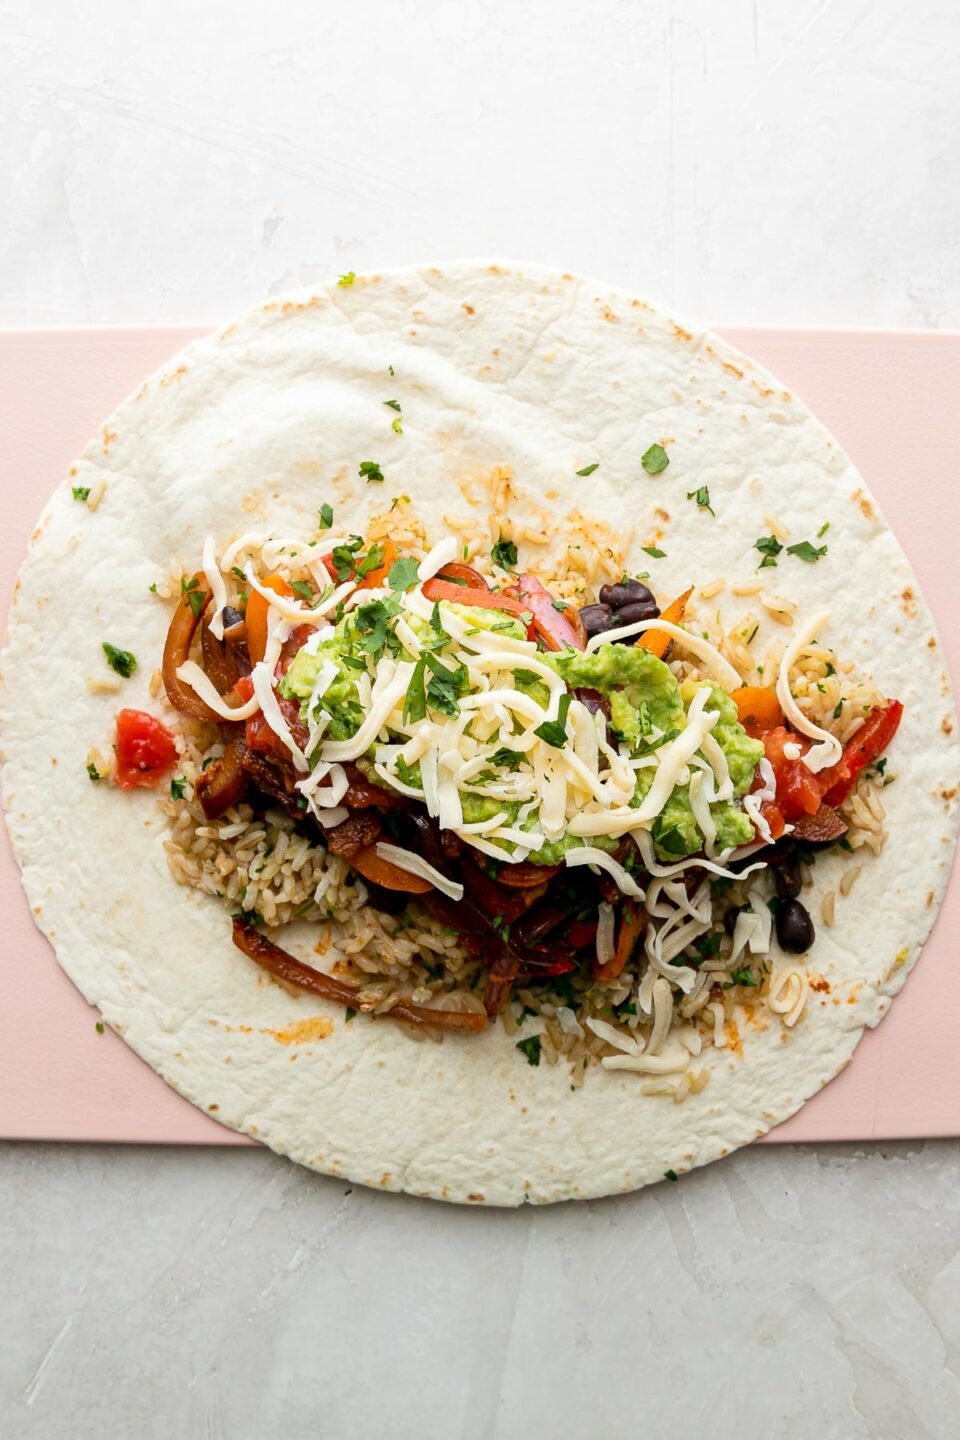 How to make chicken fajita burritos, step 5: Burrito assembly. A fajita burrito has been built atop a large flour tortilla and toppings have been added. The tortilla sits flat on a pink plastic cutting board and the cutting board sits atop a creamy white textured surface.